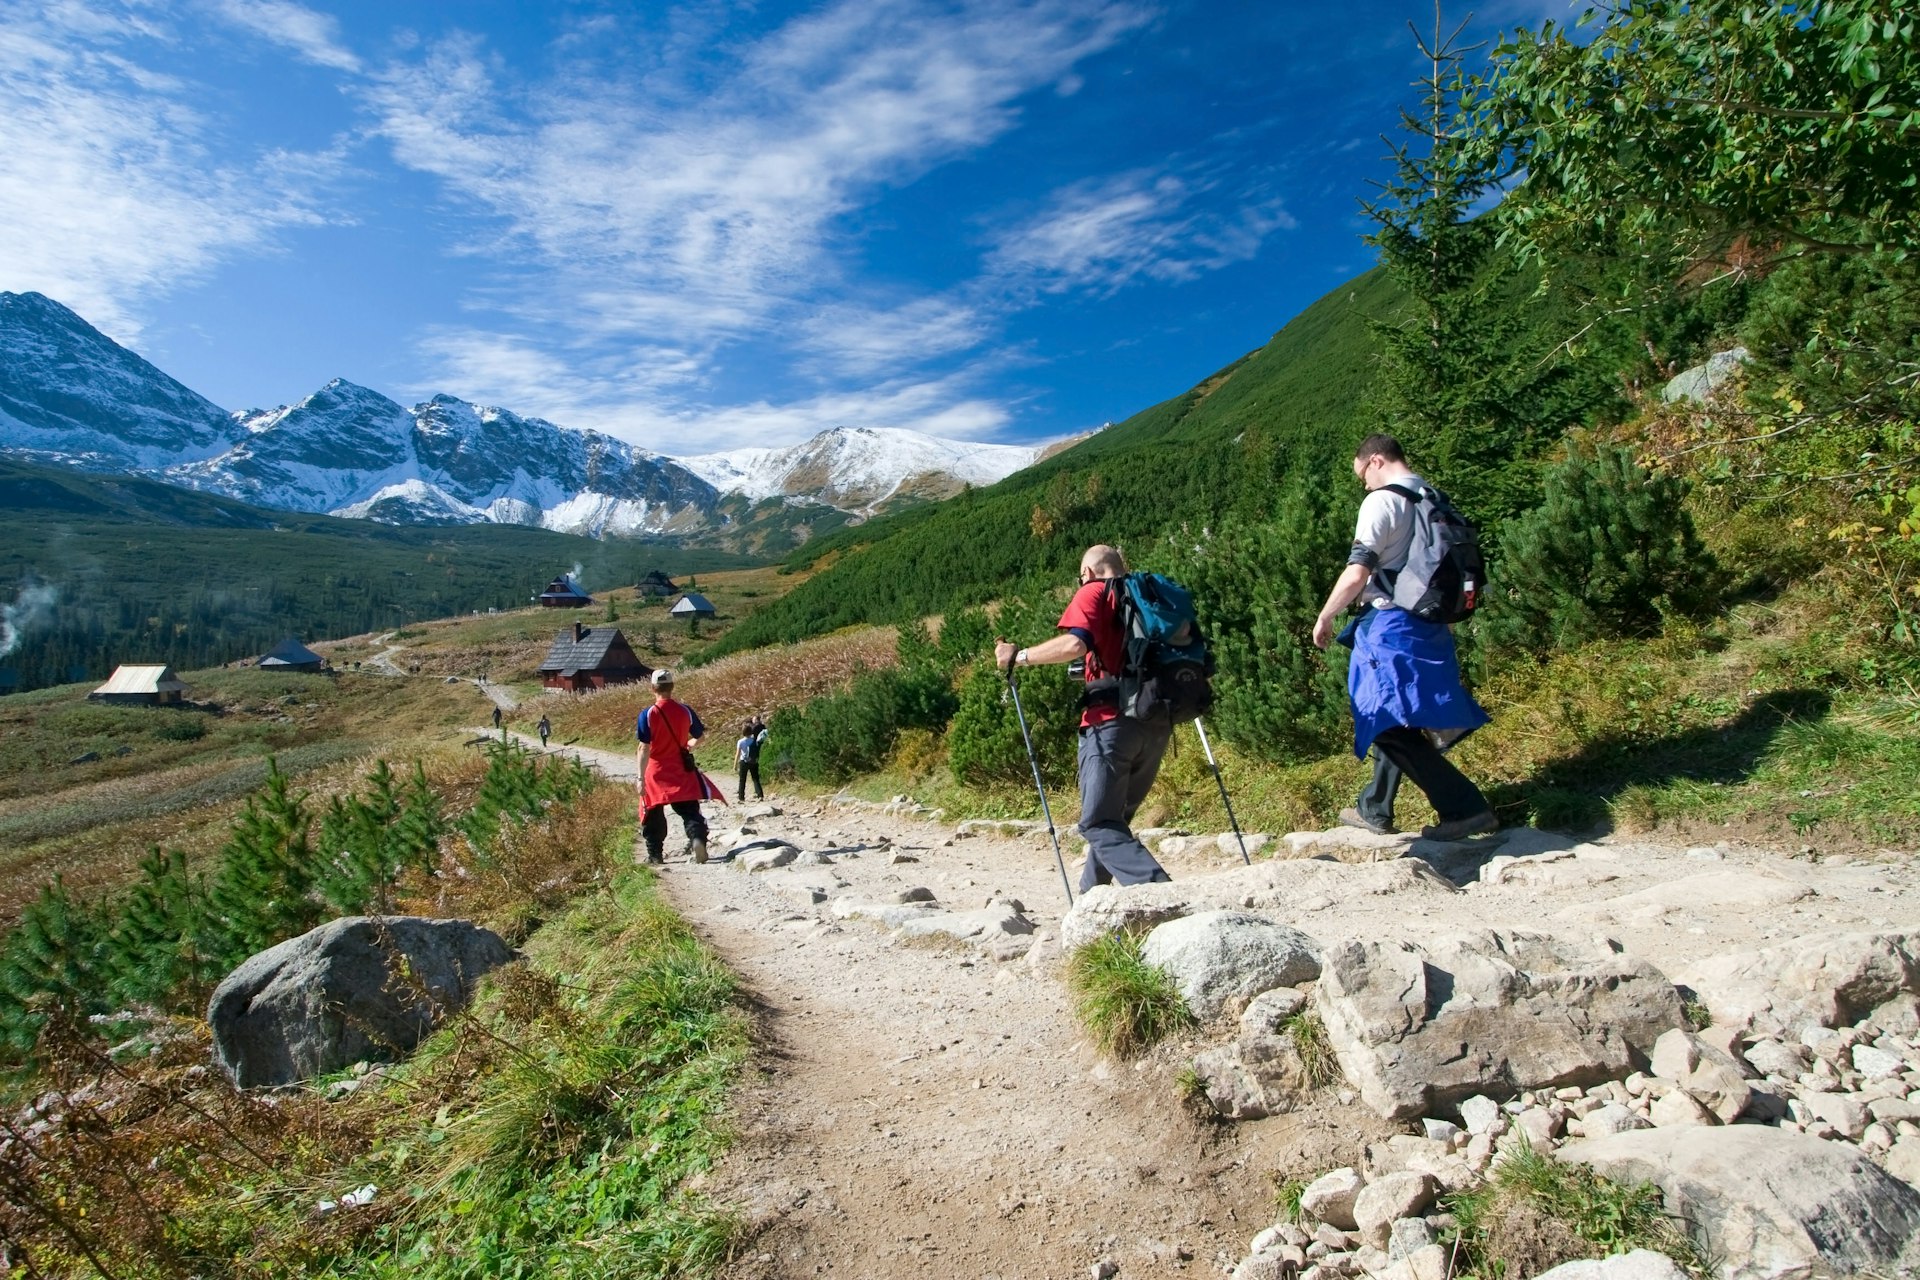 Group of people trekking in the Tatra Mountains in Poland